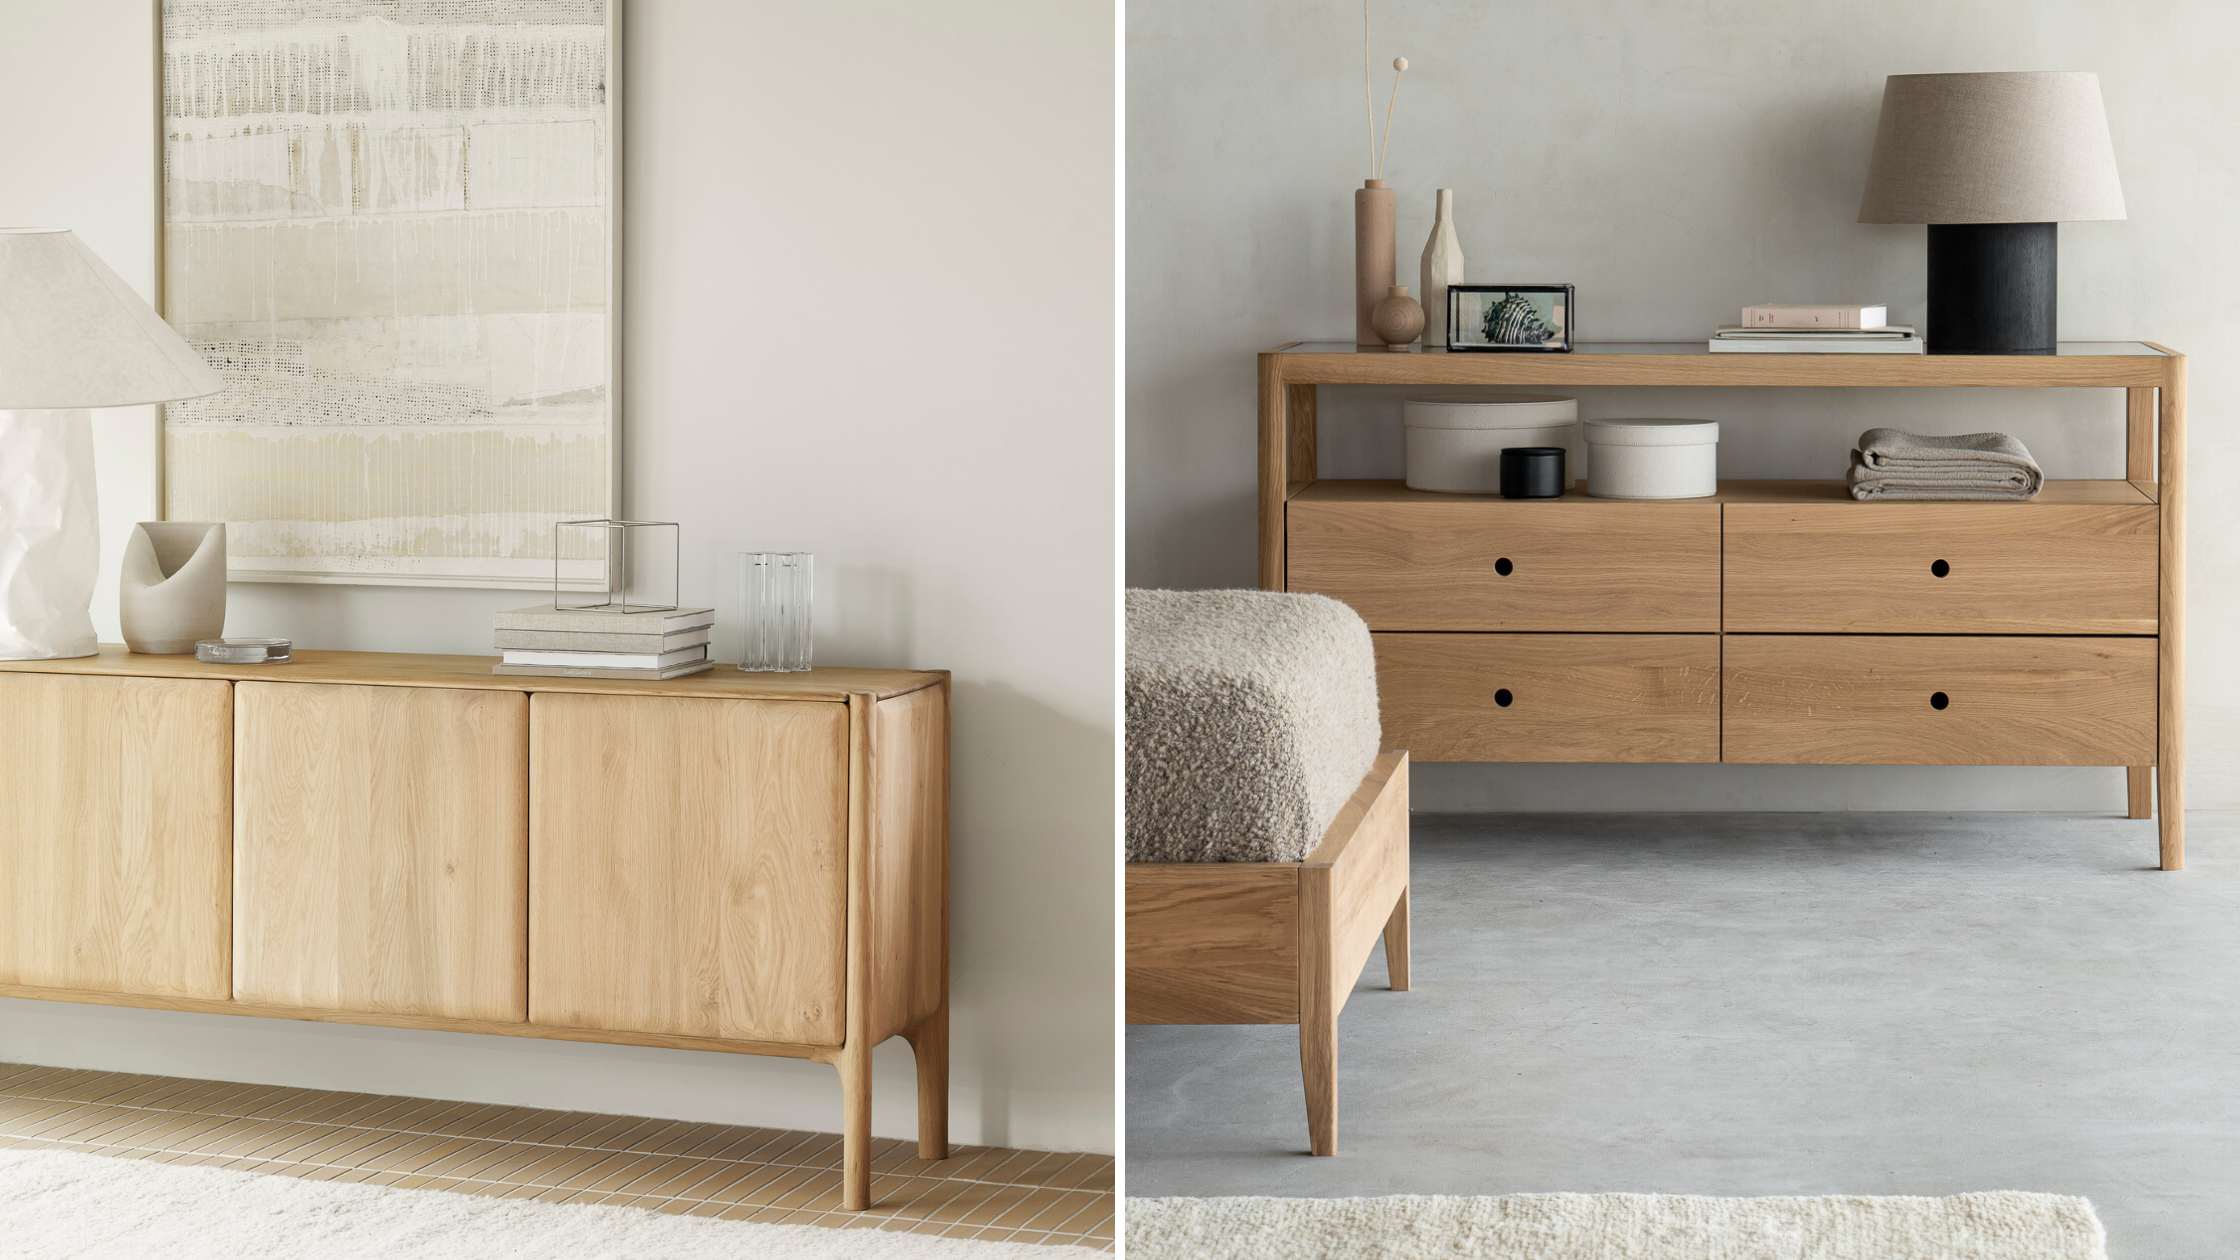 New PI sideboard and Spindle dresser by Ethnicraft